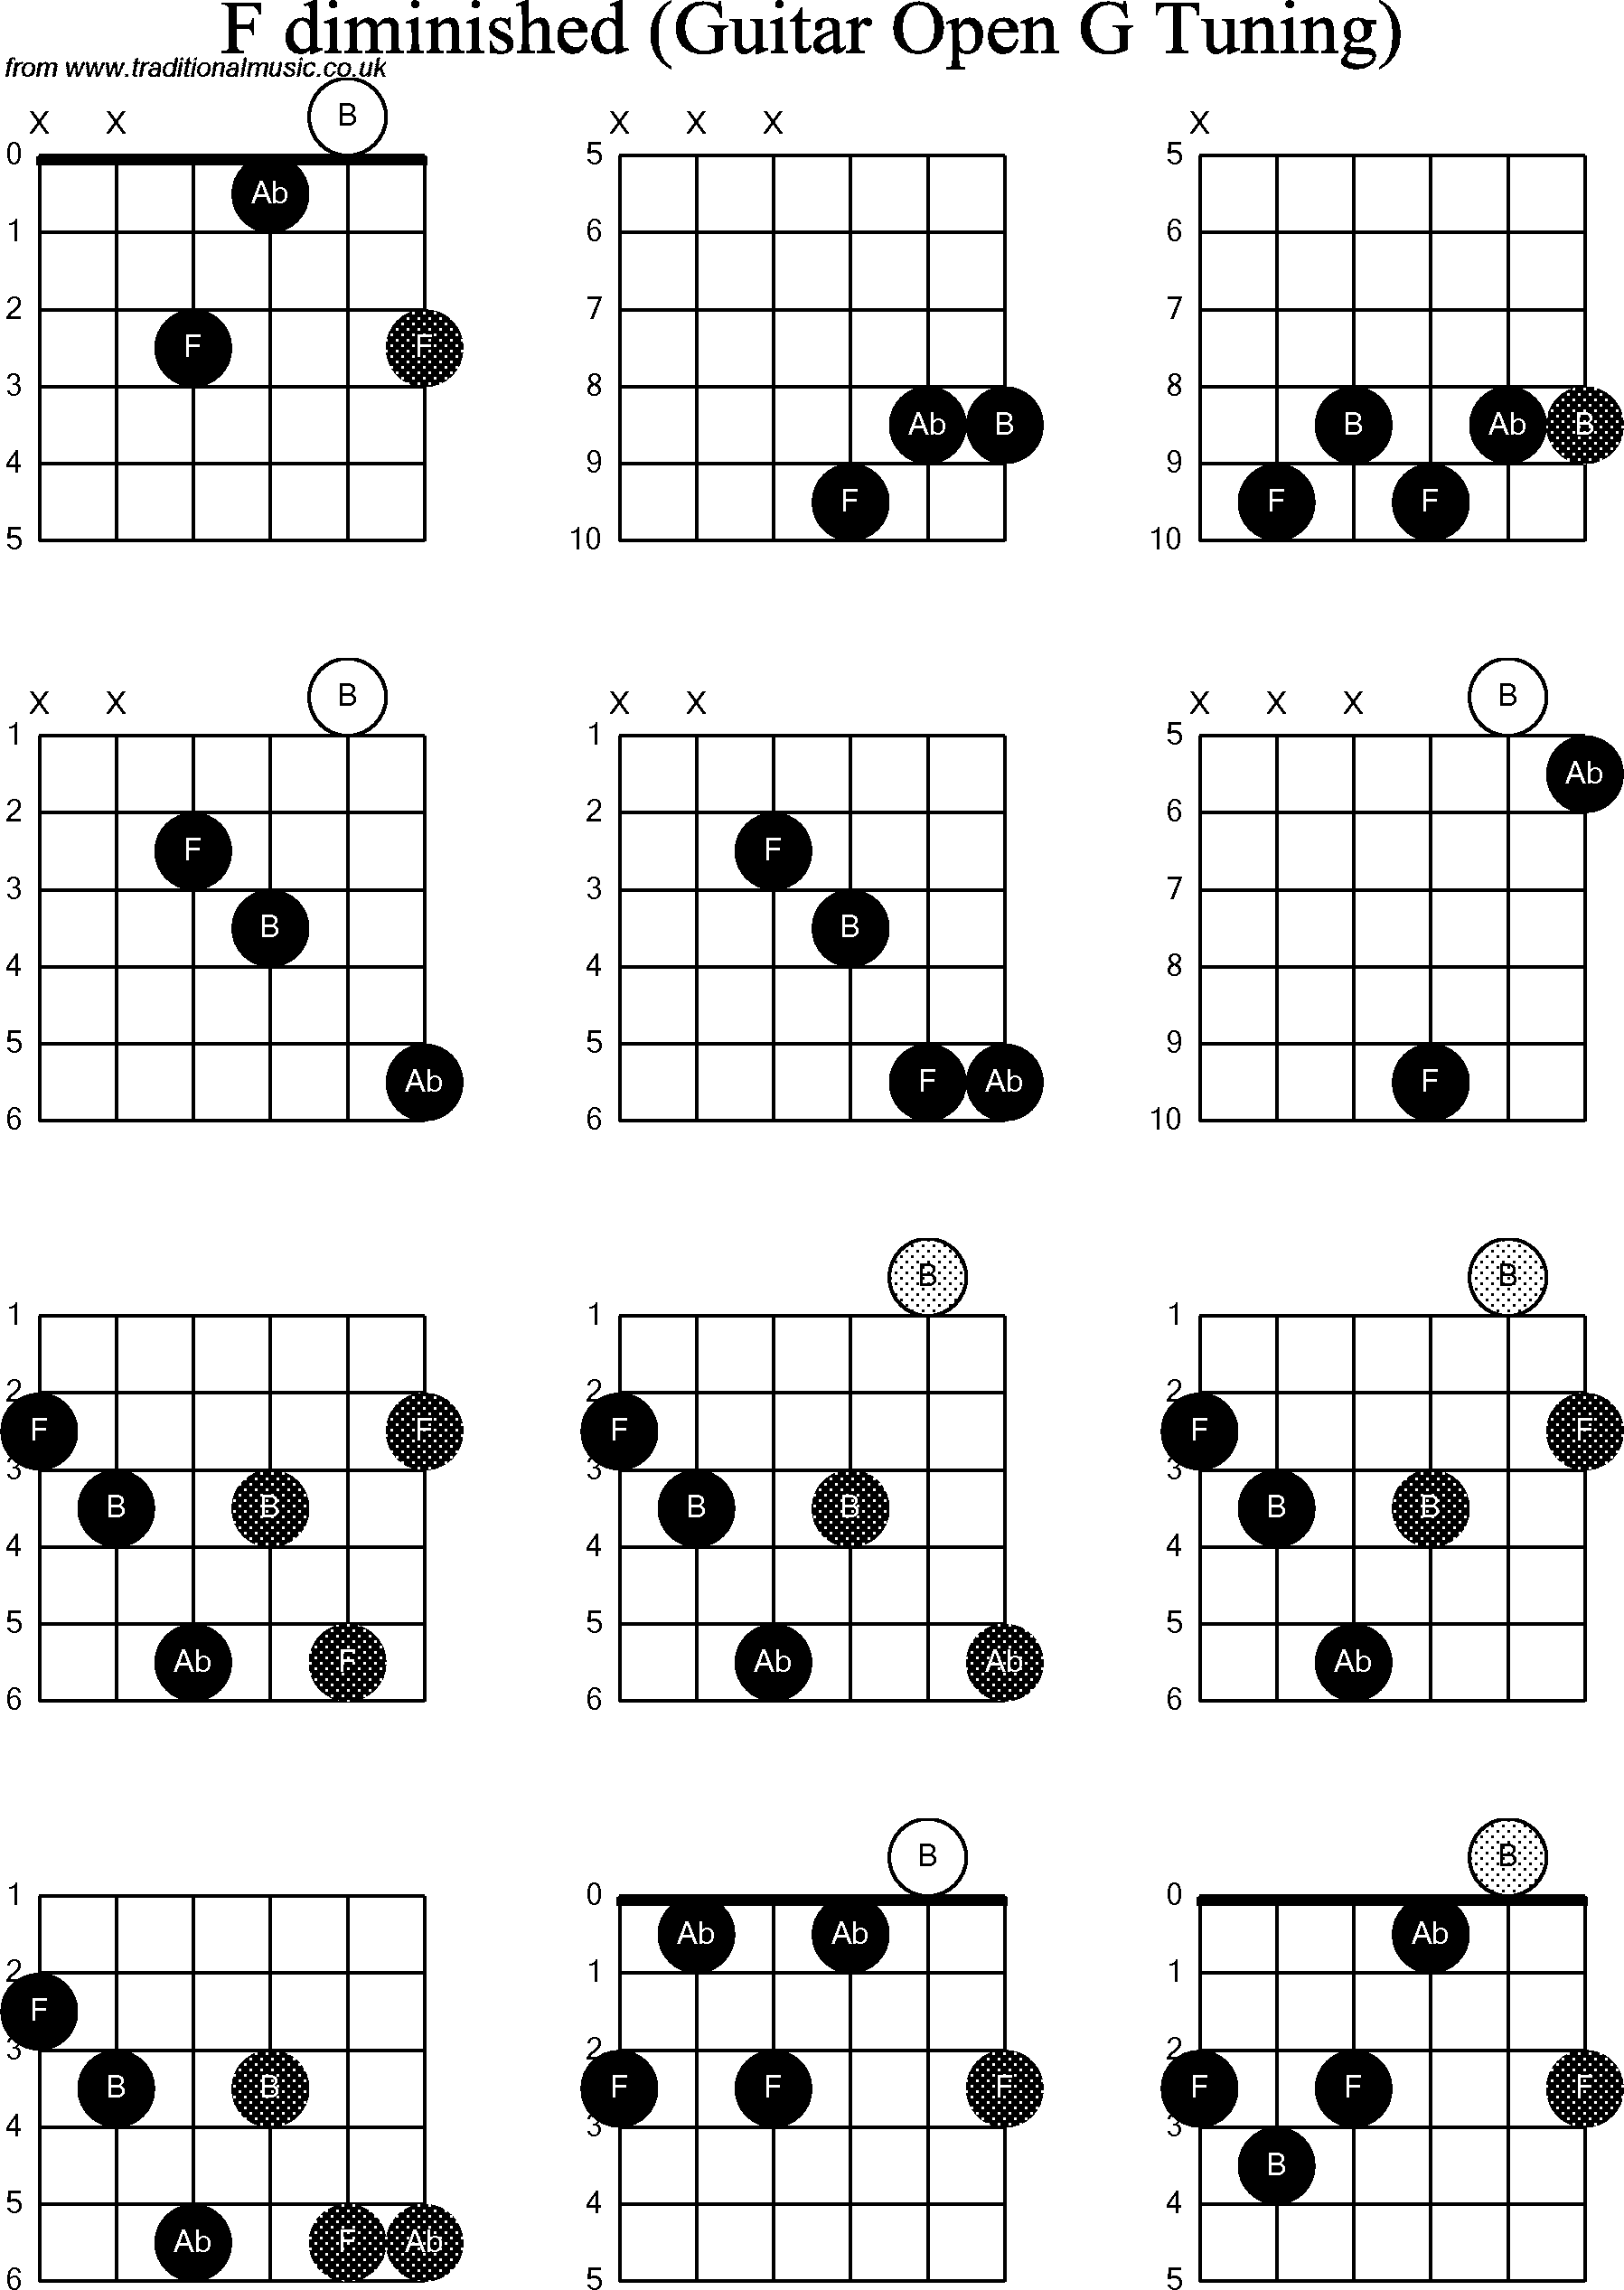 Chord diagrams for: Dobro F Diminished